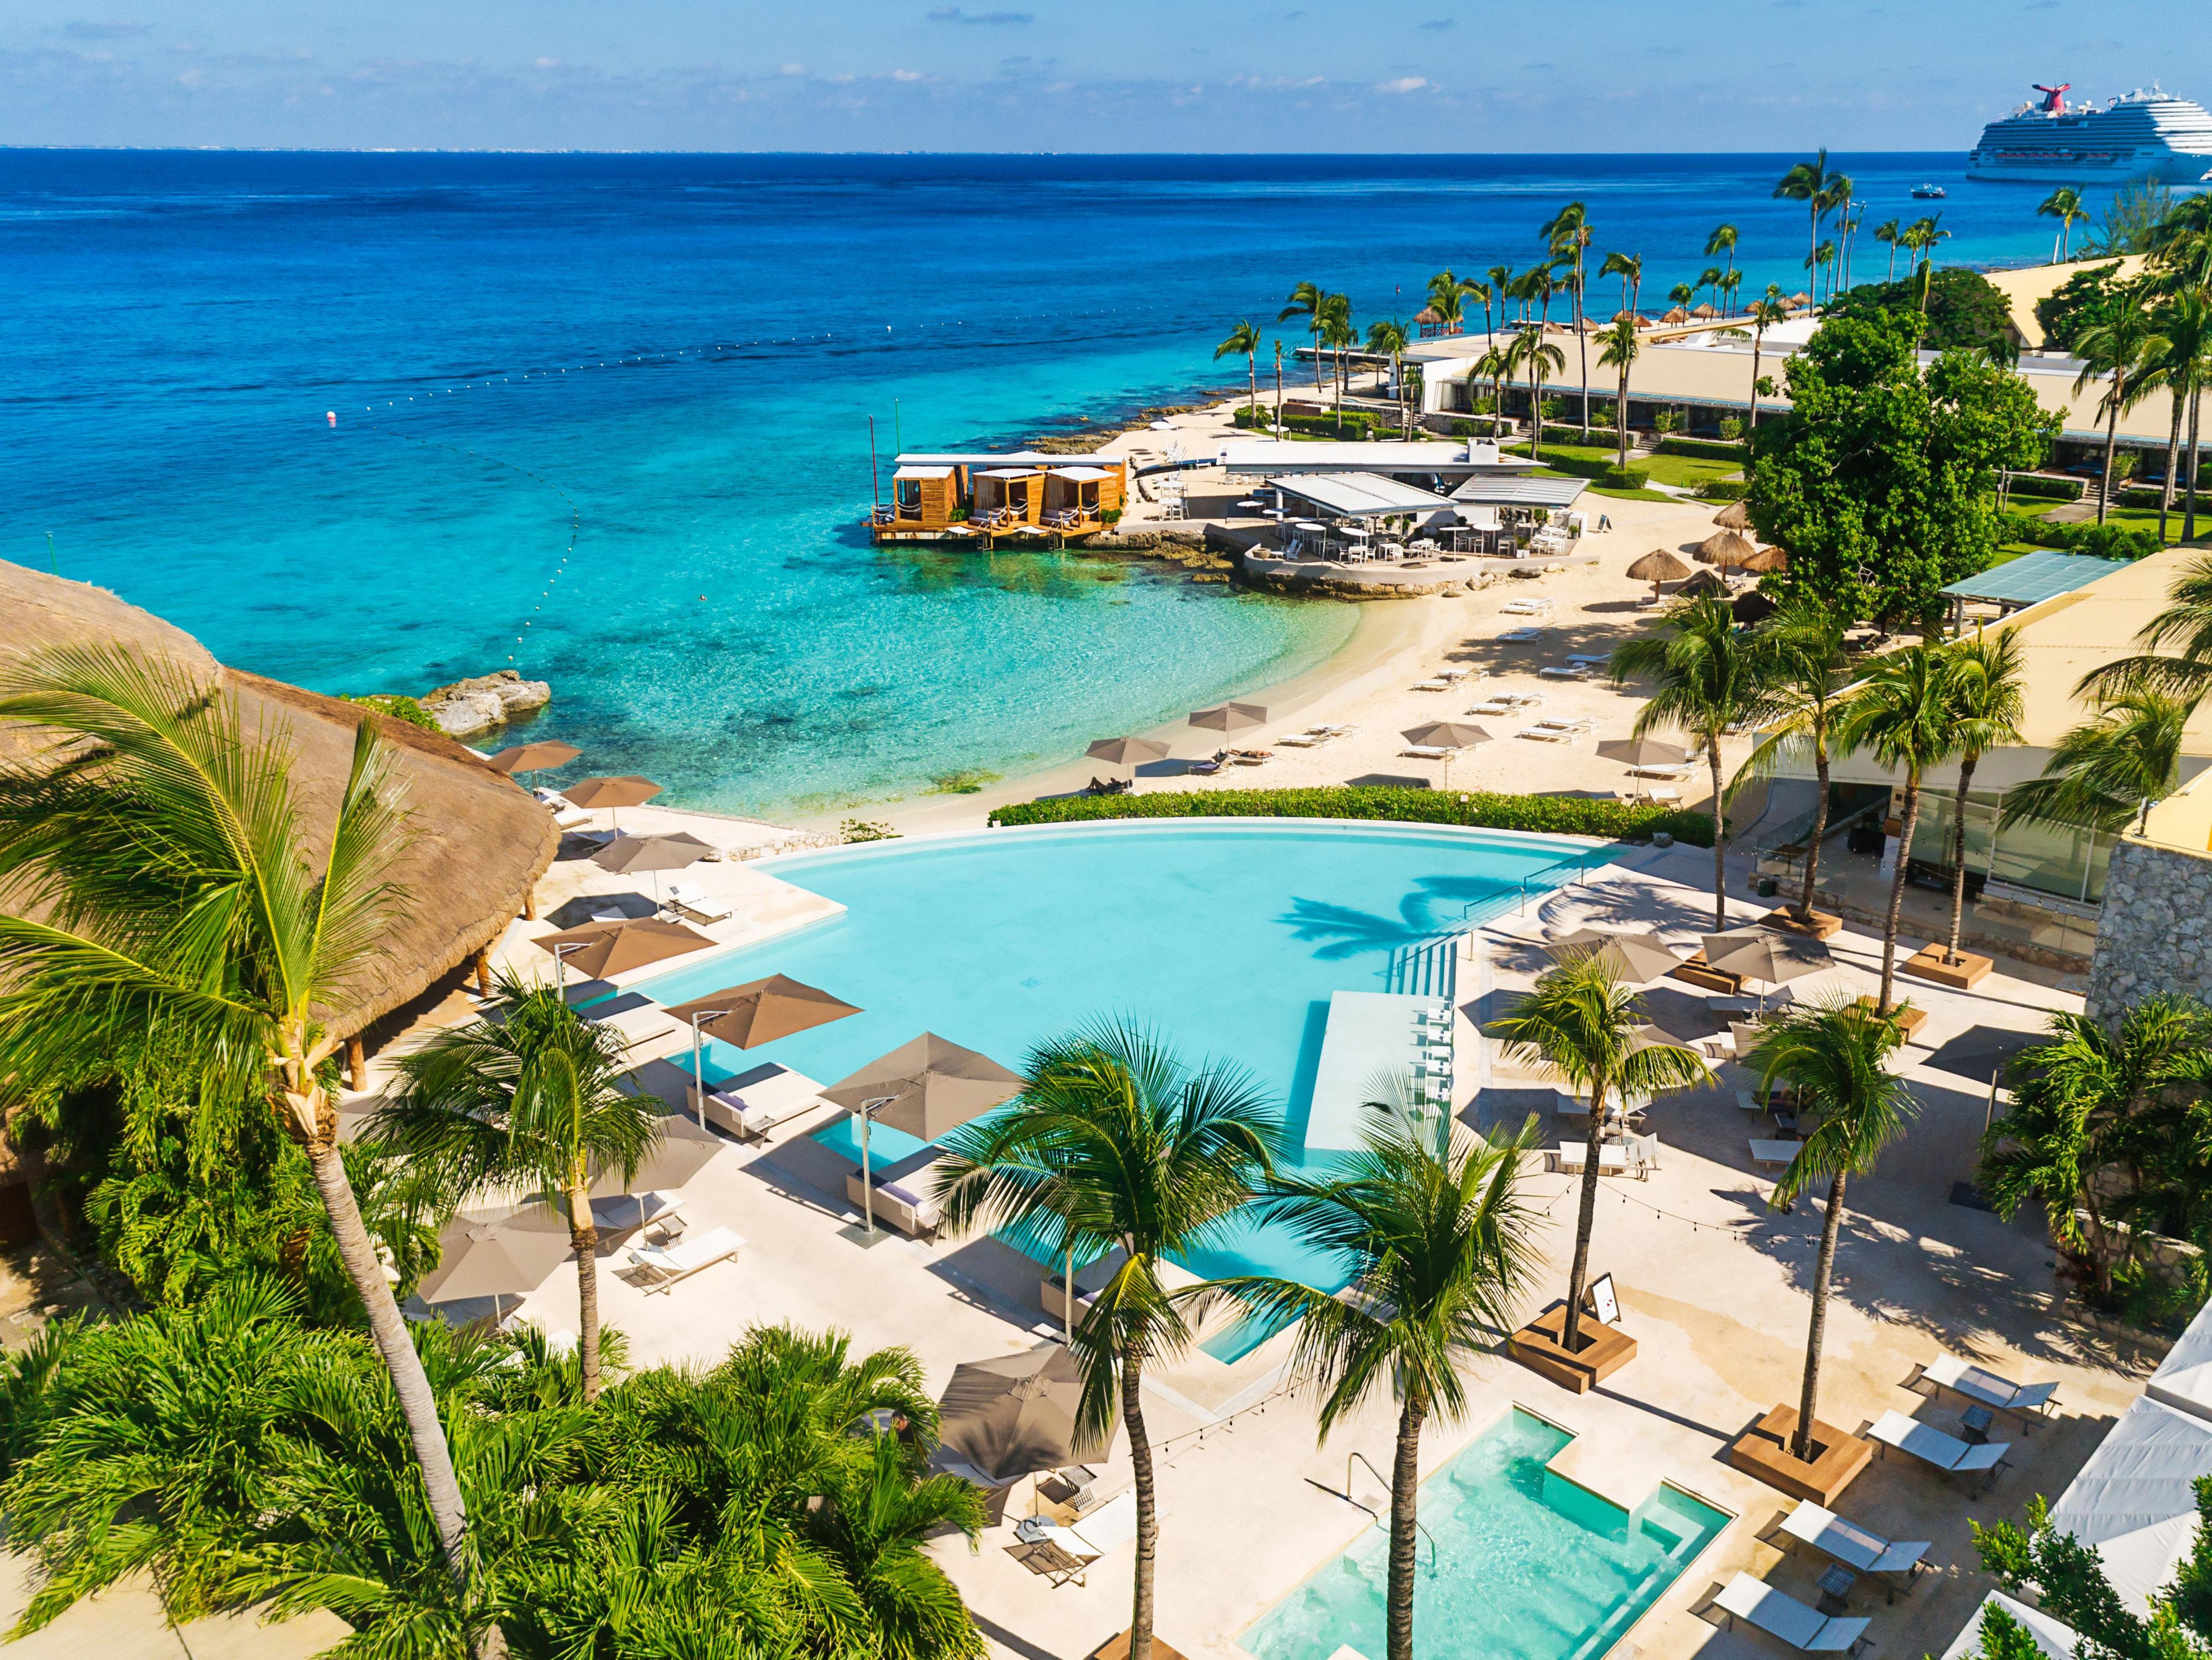 Packages to Cozumel for long stays